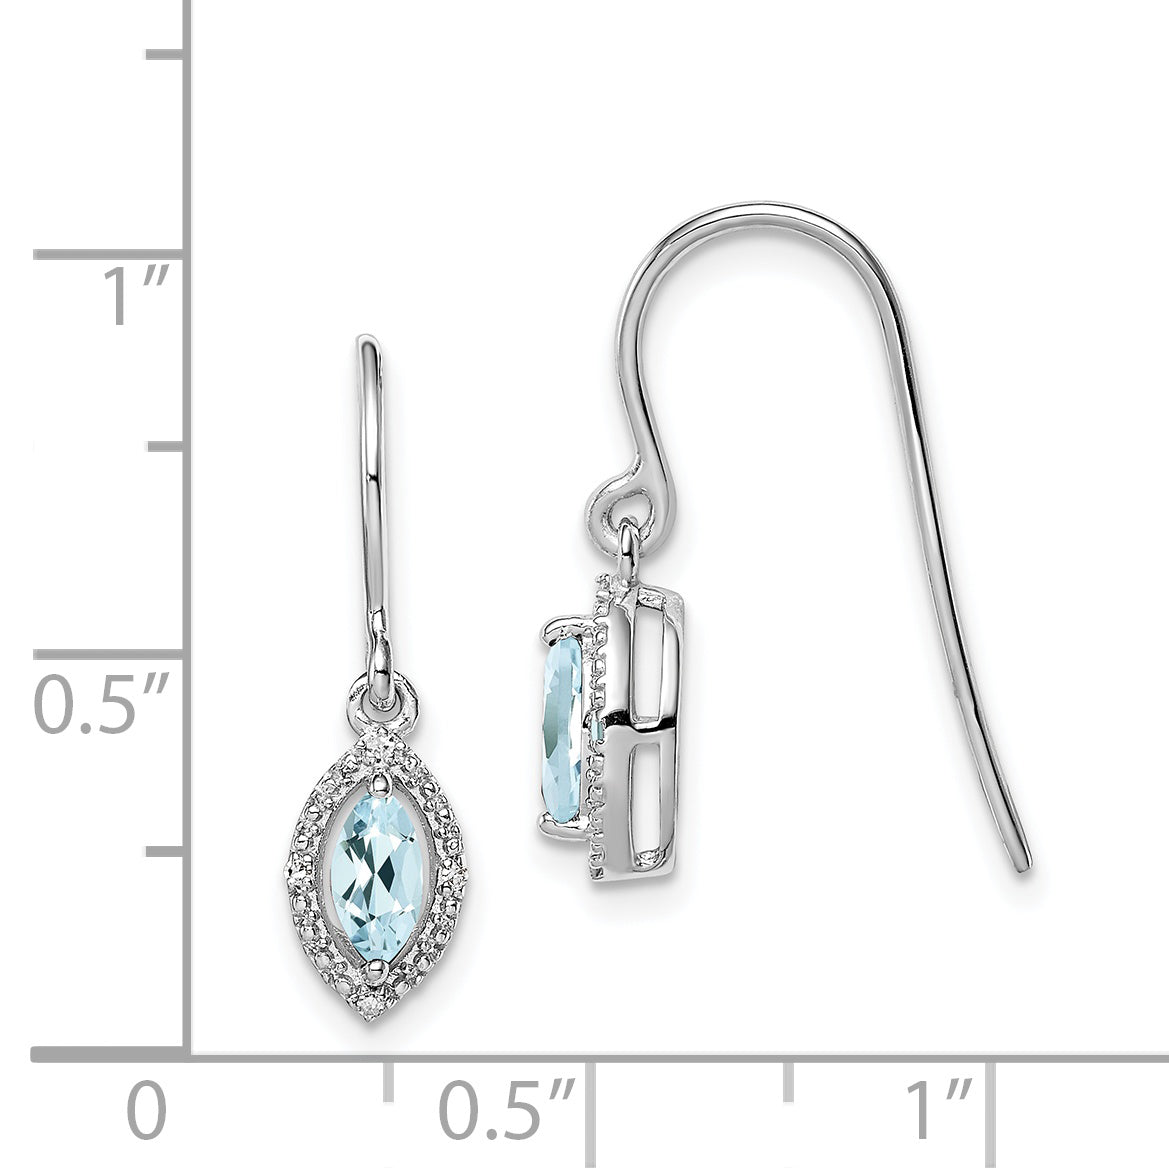 Sterling Silver Rhodium-plated Diamond and Aquamarine Earrings